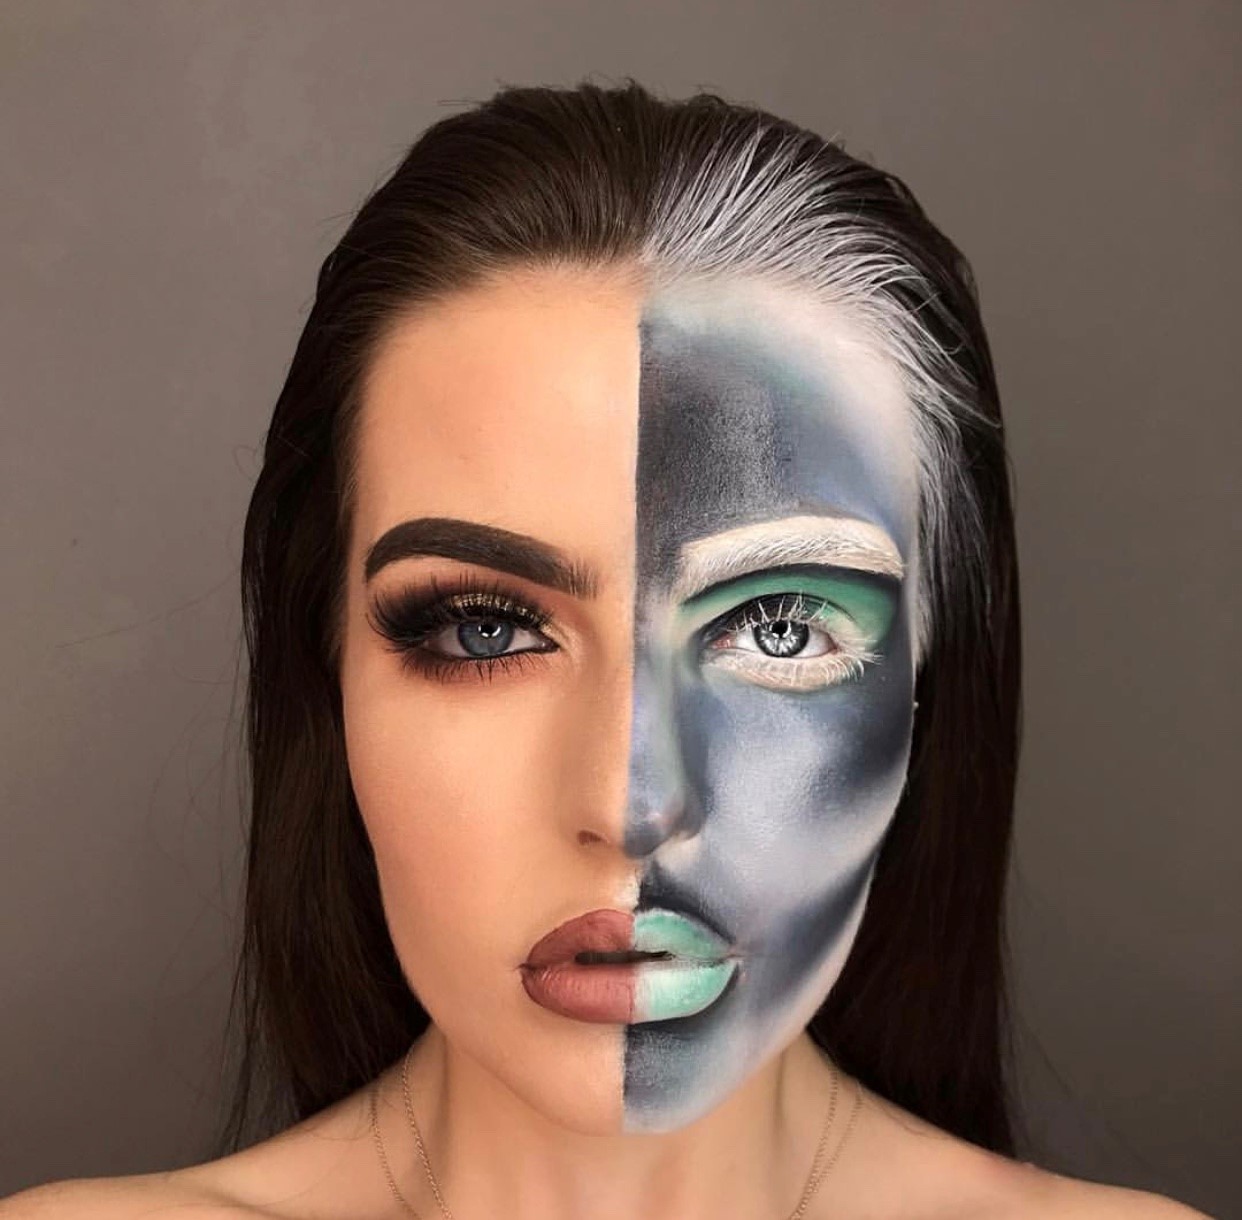 College students’ make-up accounts attract major attention 